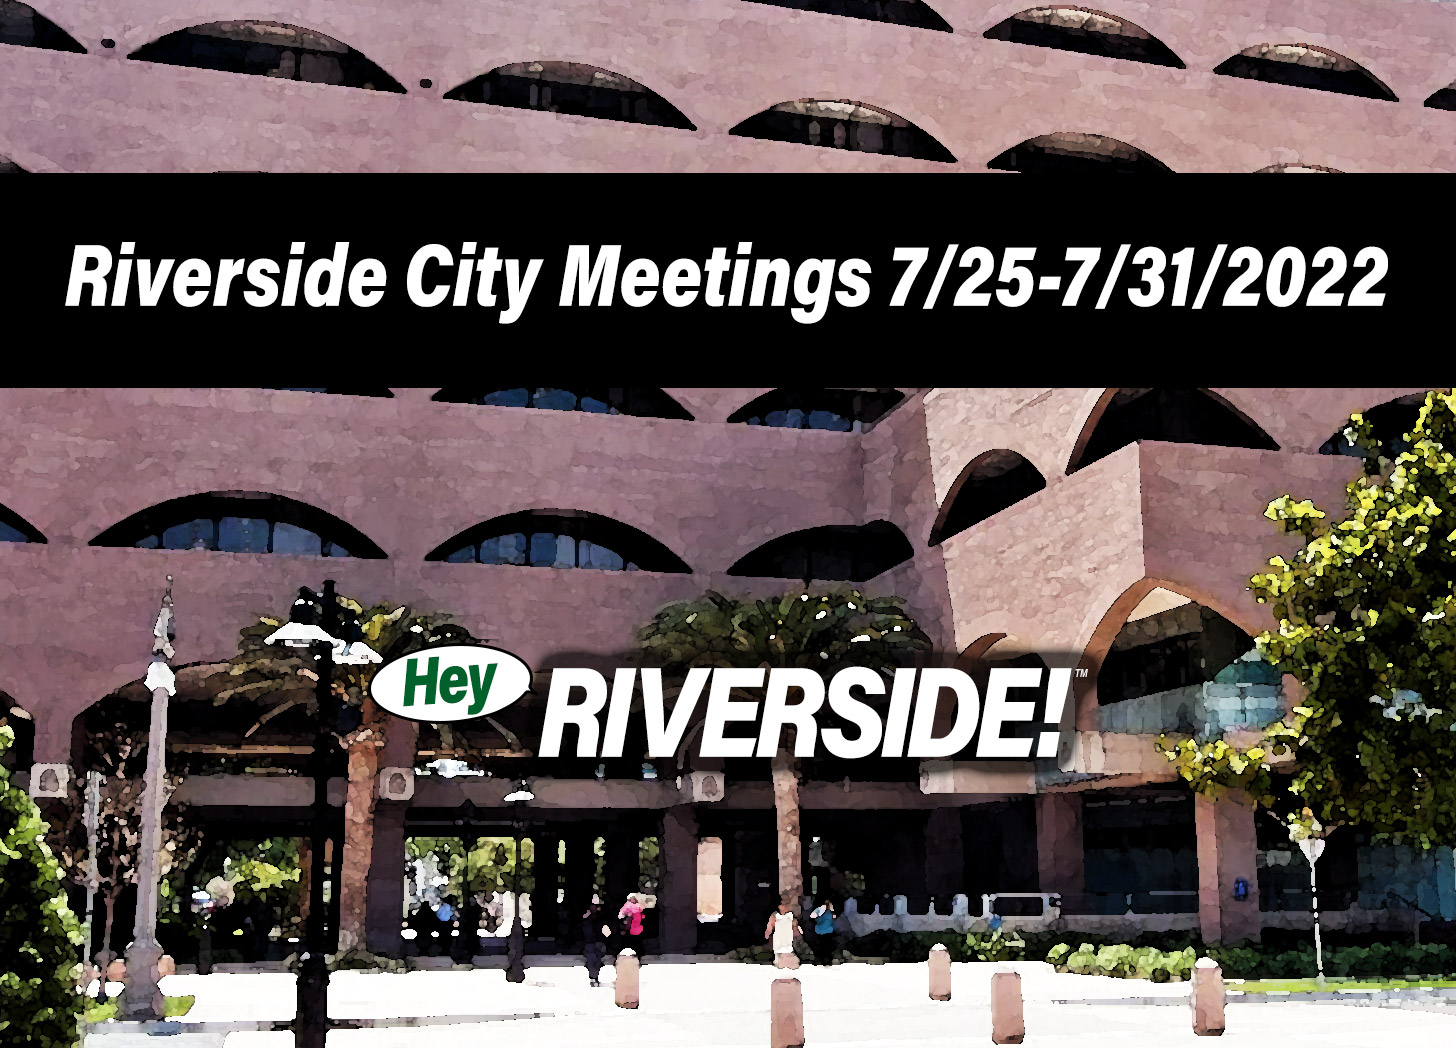 Riverside City Meetings July 25th through July 31st 2022